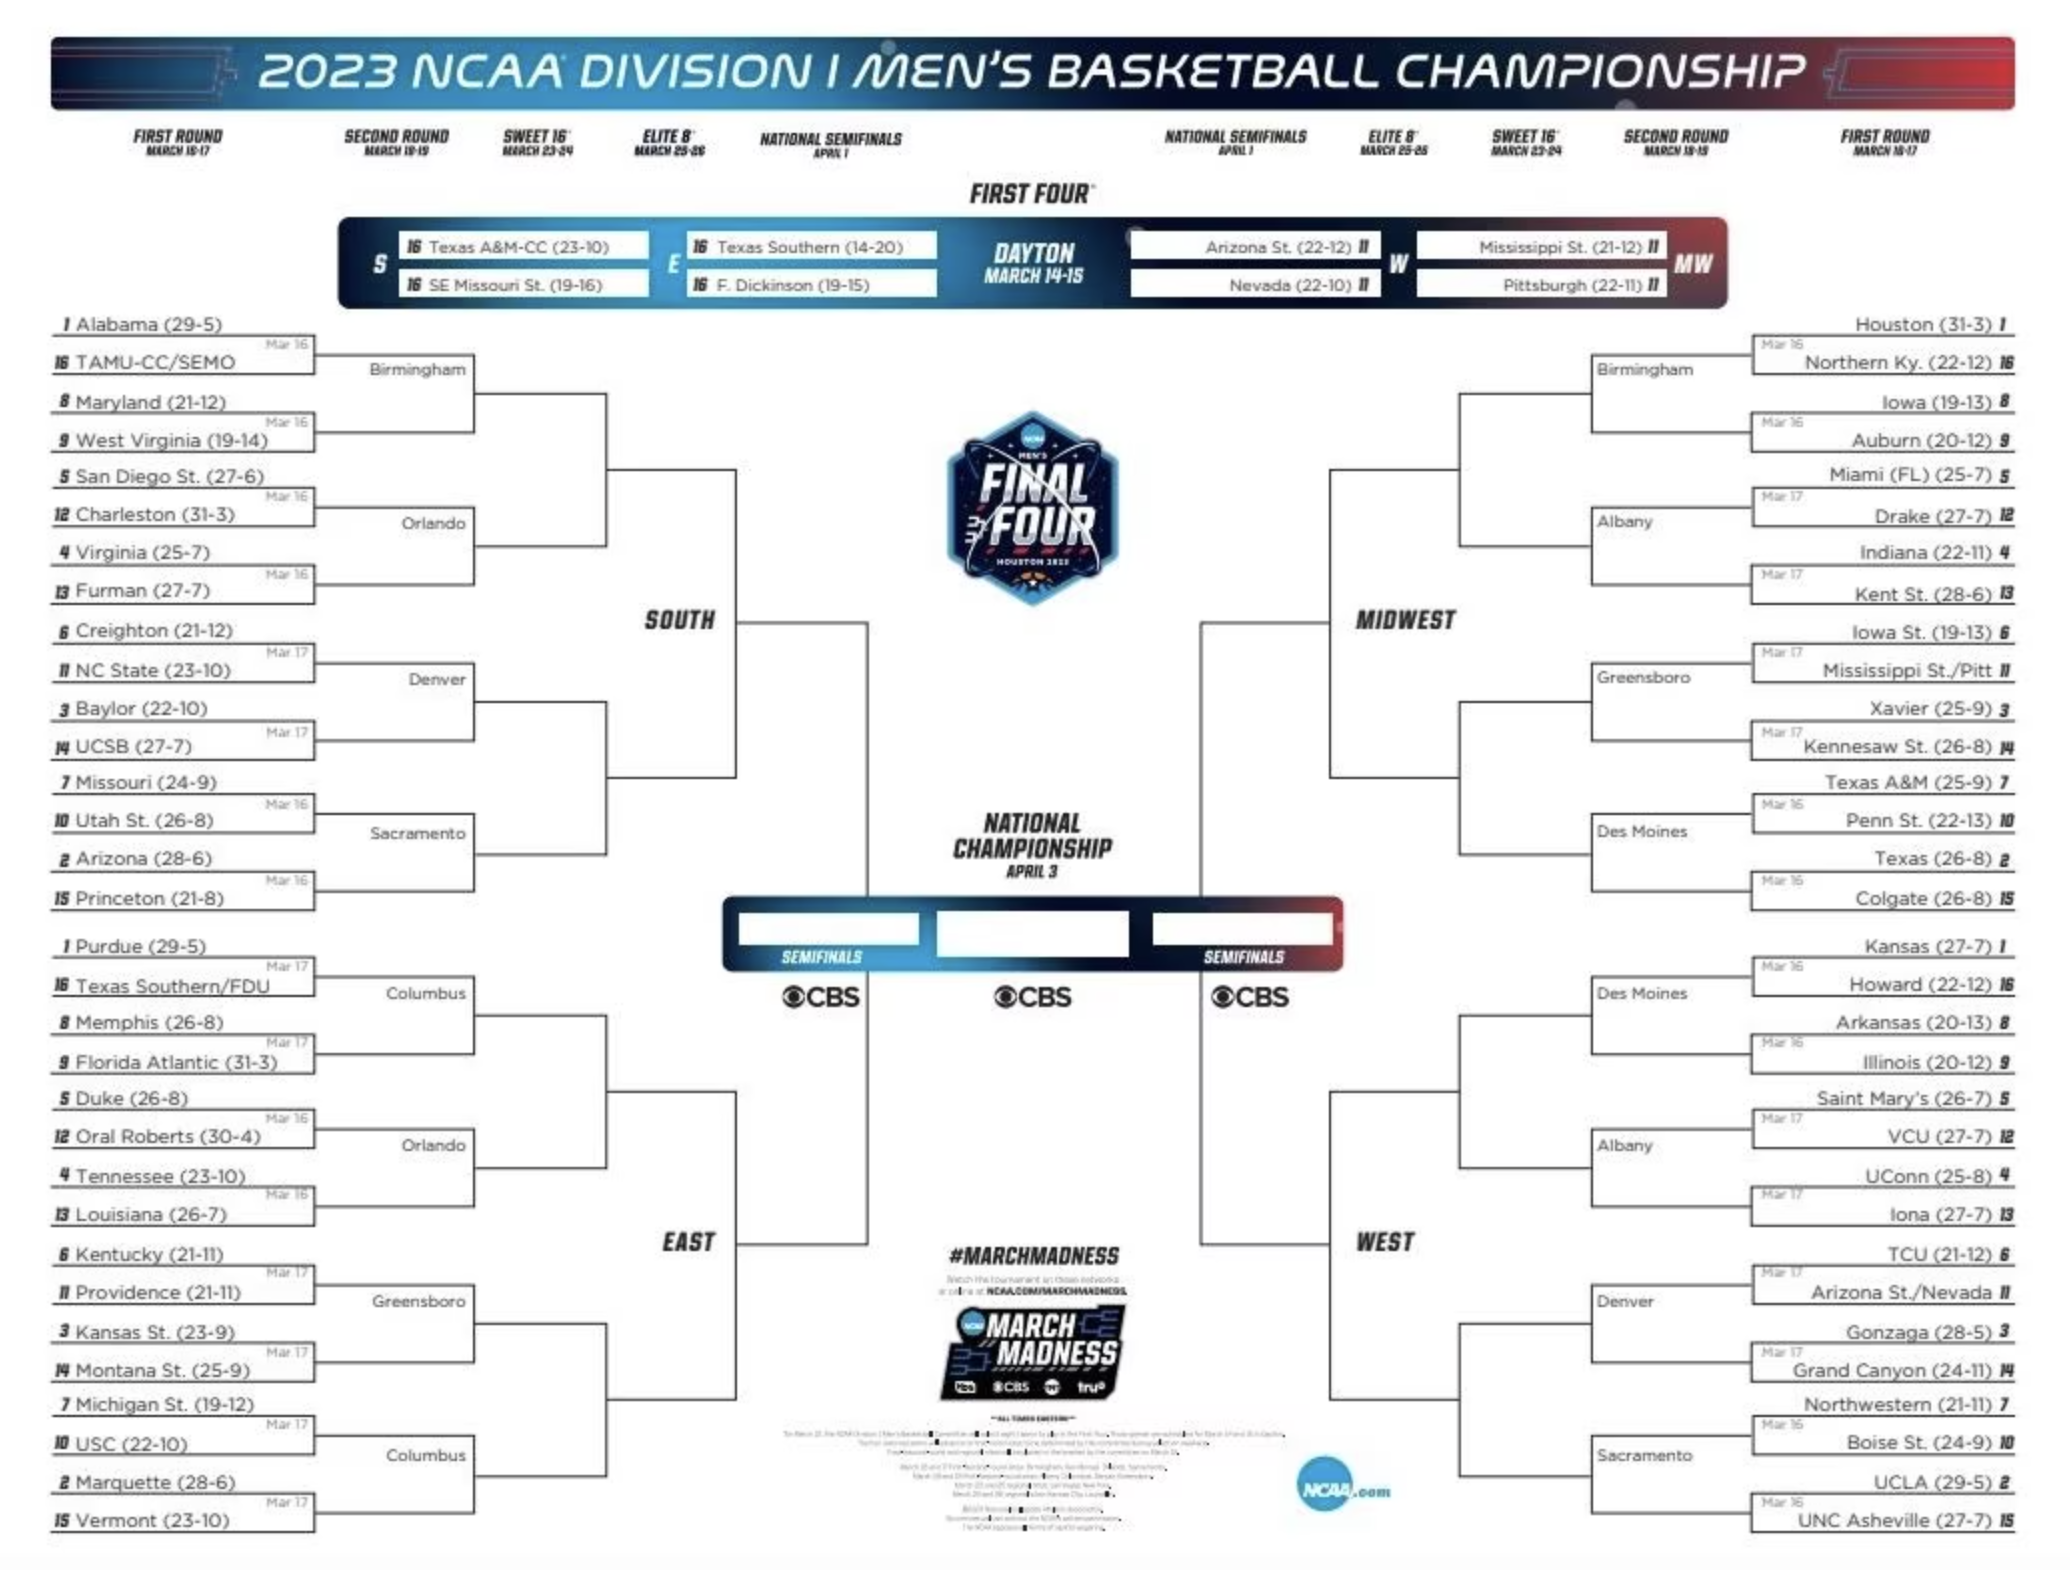 stream march madness games